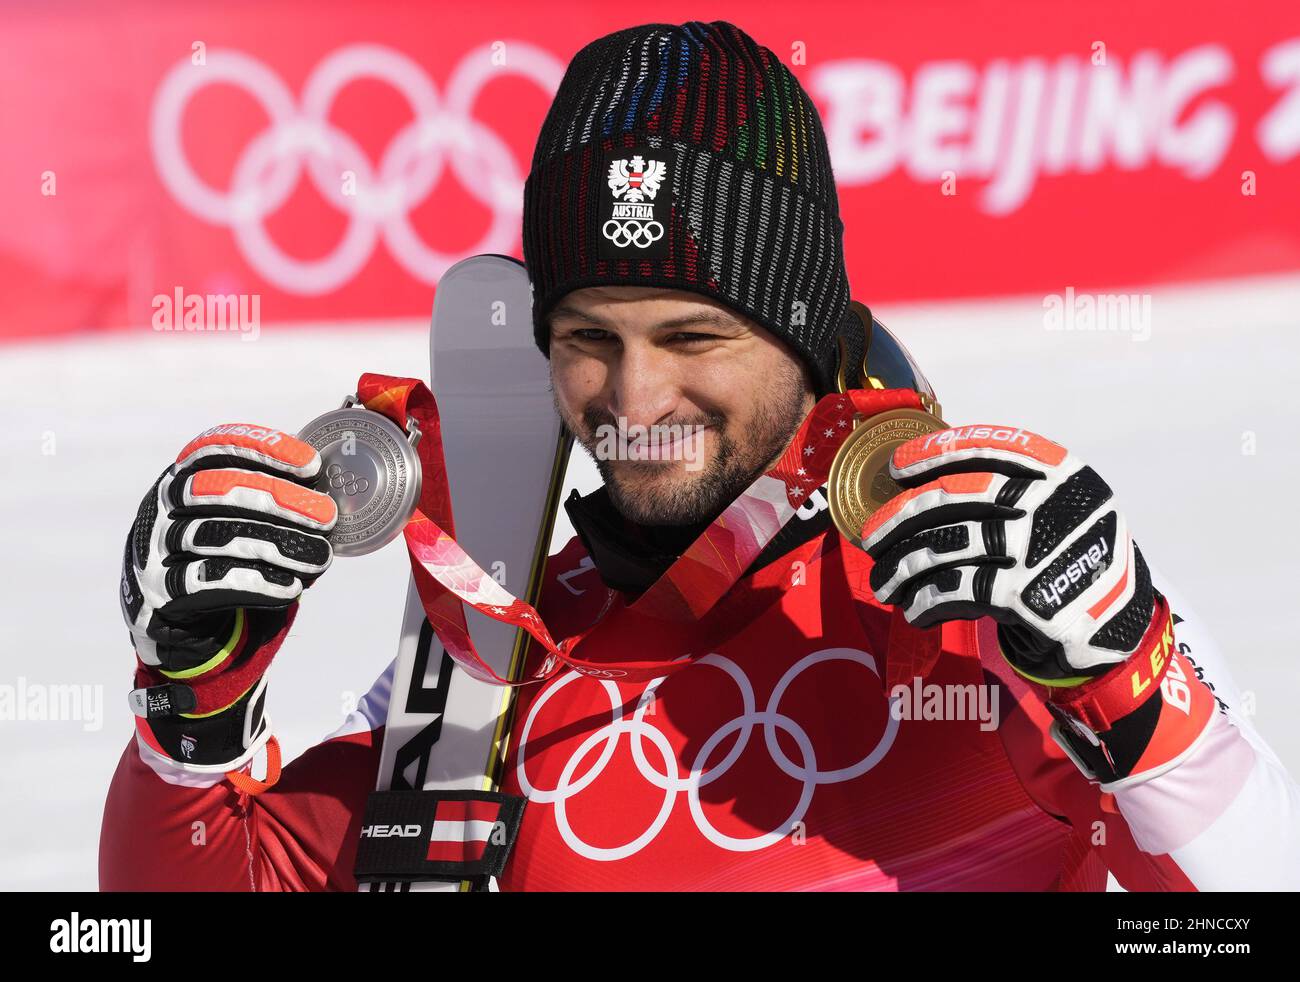 Beijing, China. 16th Feb, 2022. Johannes Strolz of Austria displays the silver medal he won in the men's Slalom event and the gold medal he won in the Alpine Combined event at the Winter Olympics in Beijing on Friday February 16, 2022. Photo by Rick T. Wilking/UPI Credit: UPI/Alamy Live News Stock Photo